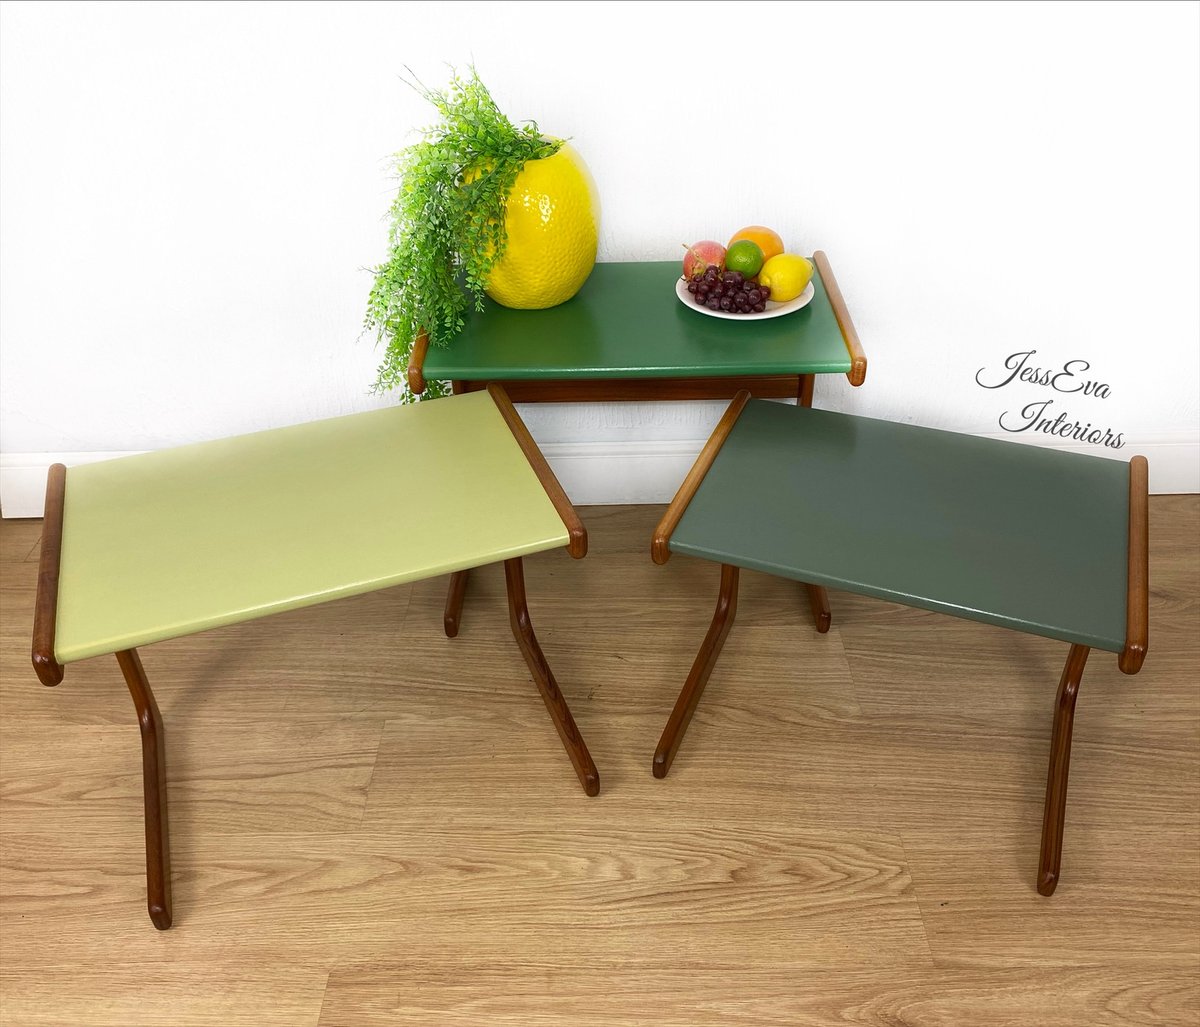 Vintage Mid Century Modern Retro G Plan NEST OF TABLES / SET OF 3 TABLES / COFFEE TABLES in green